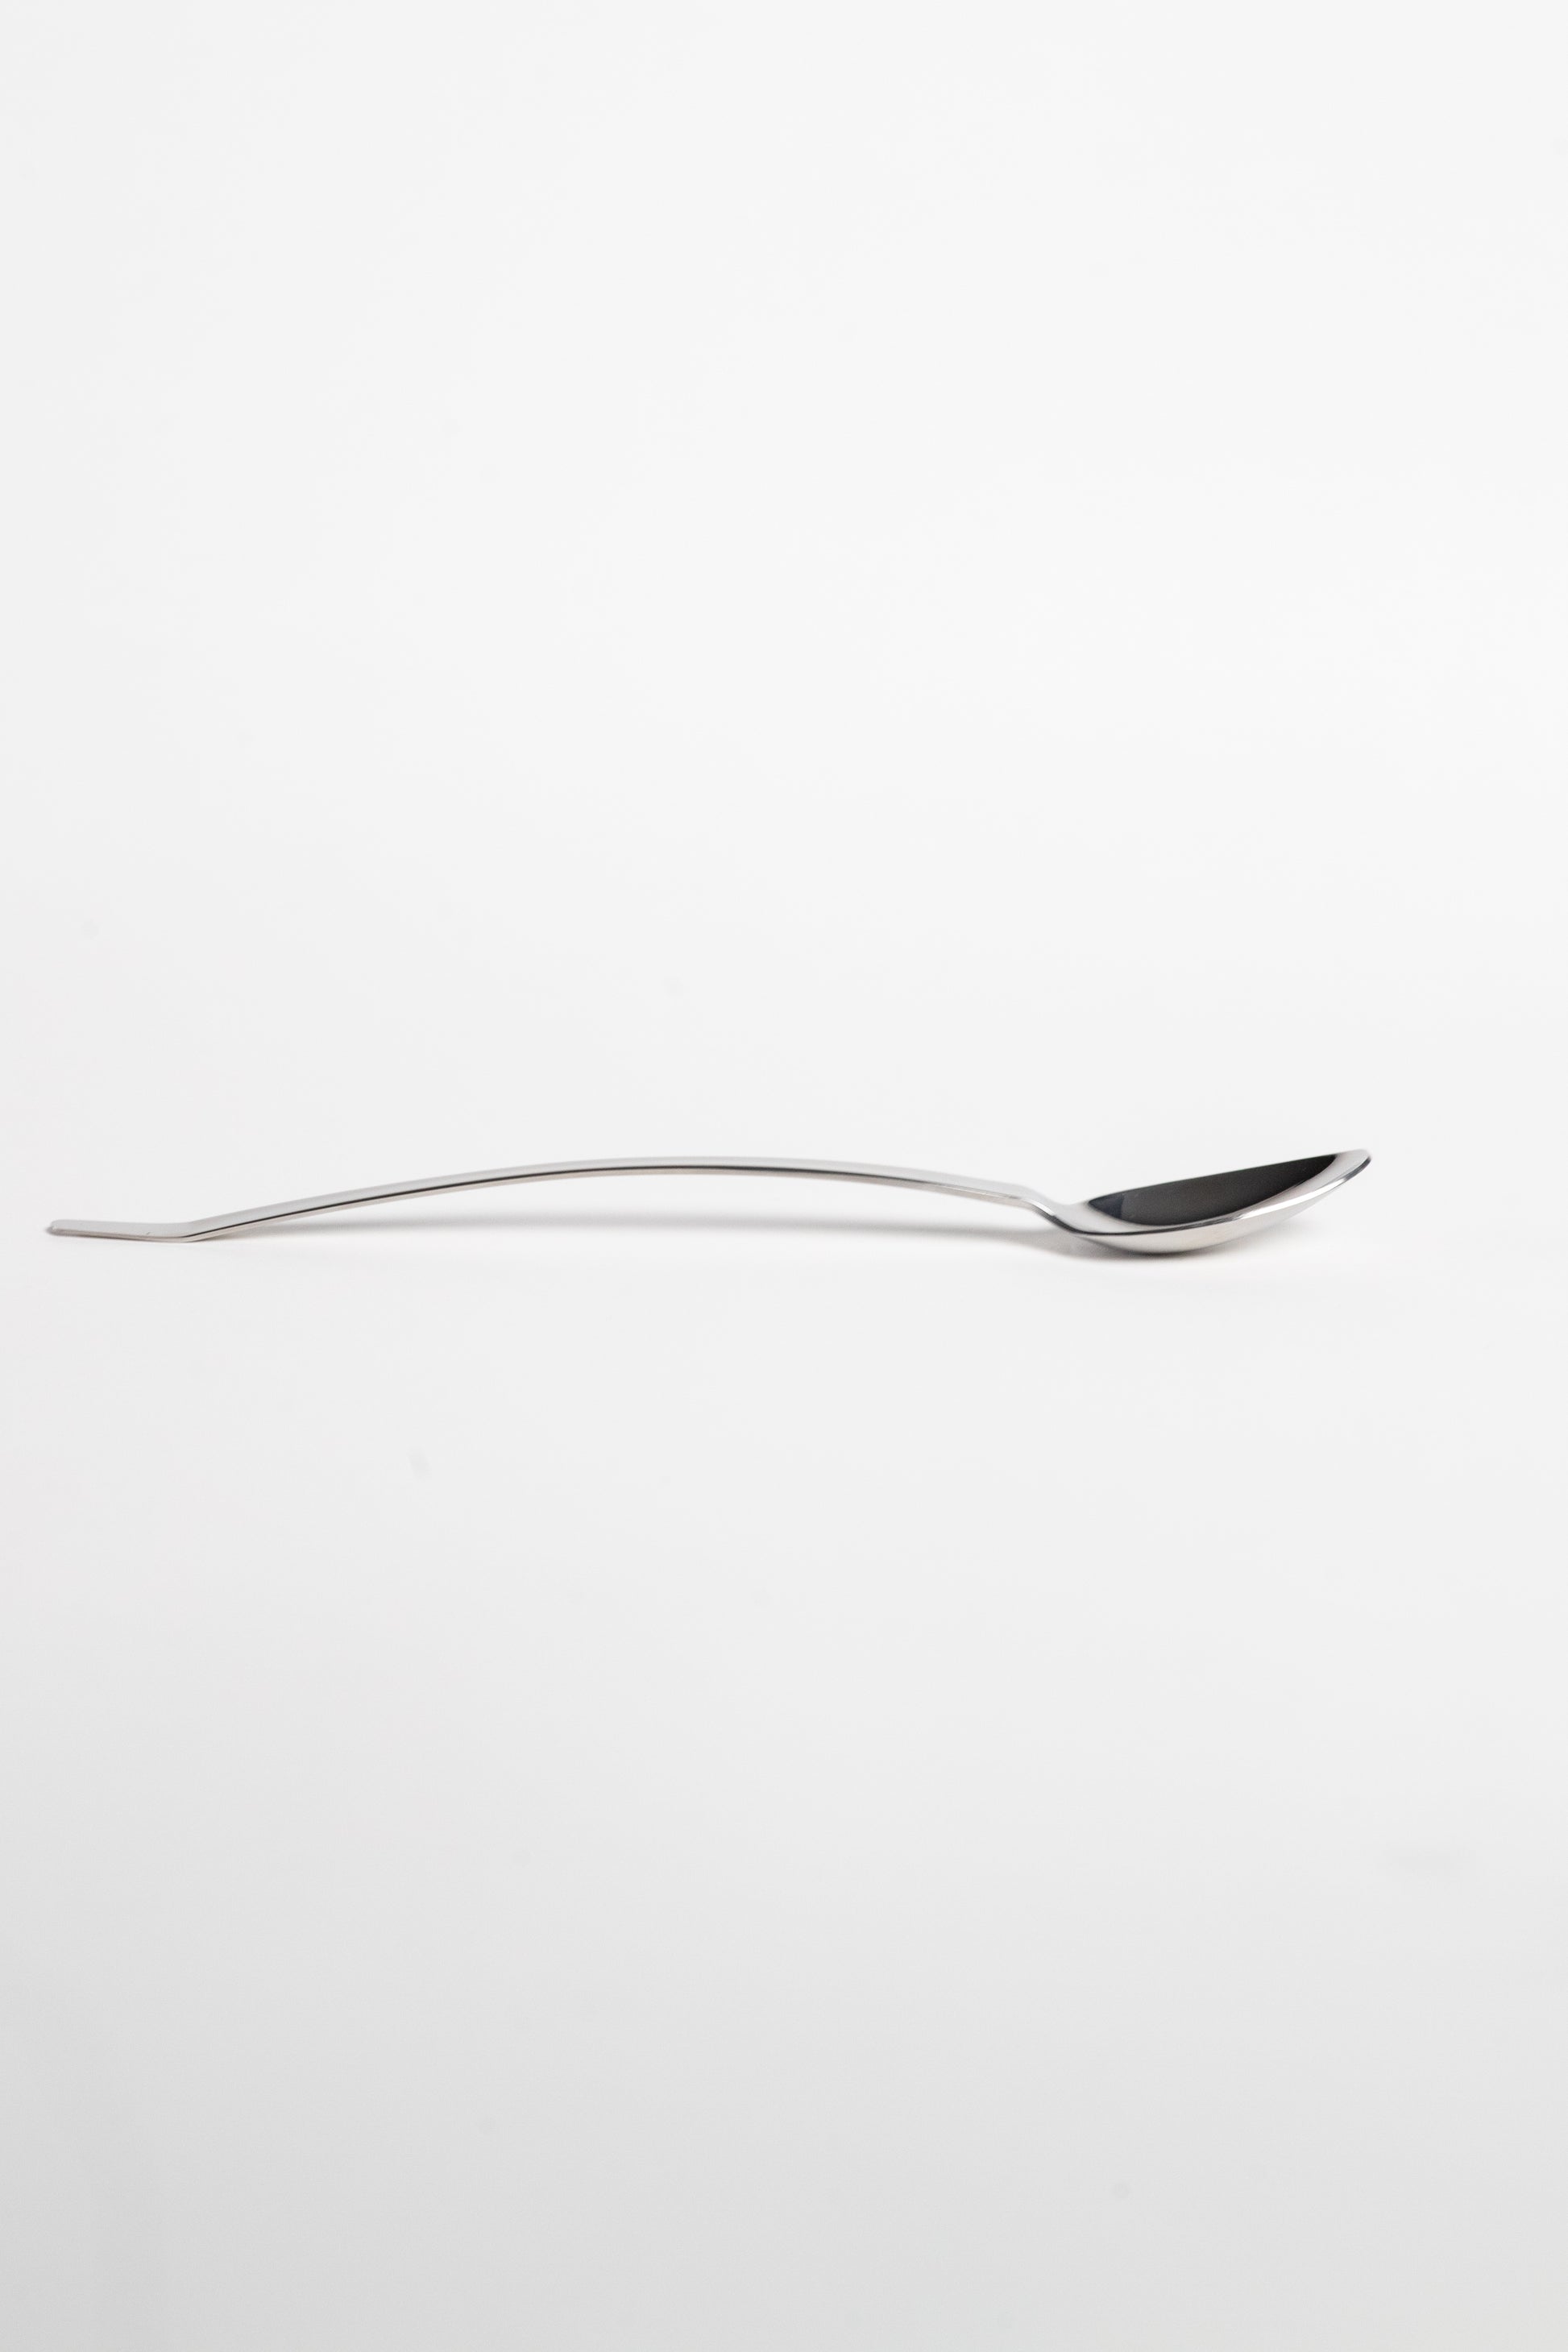 Quenelle Spoon